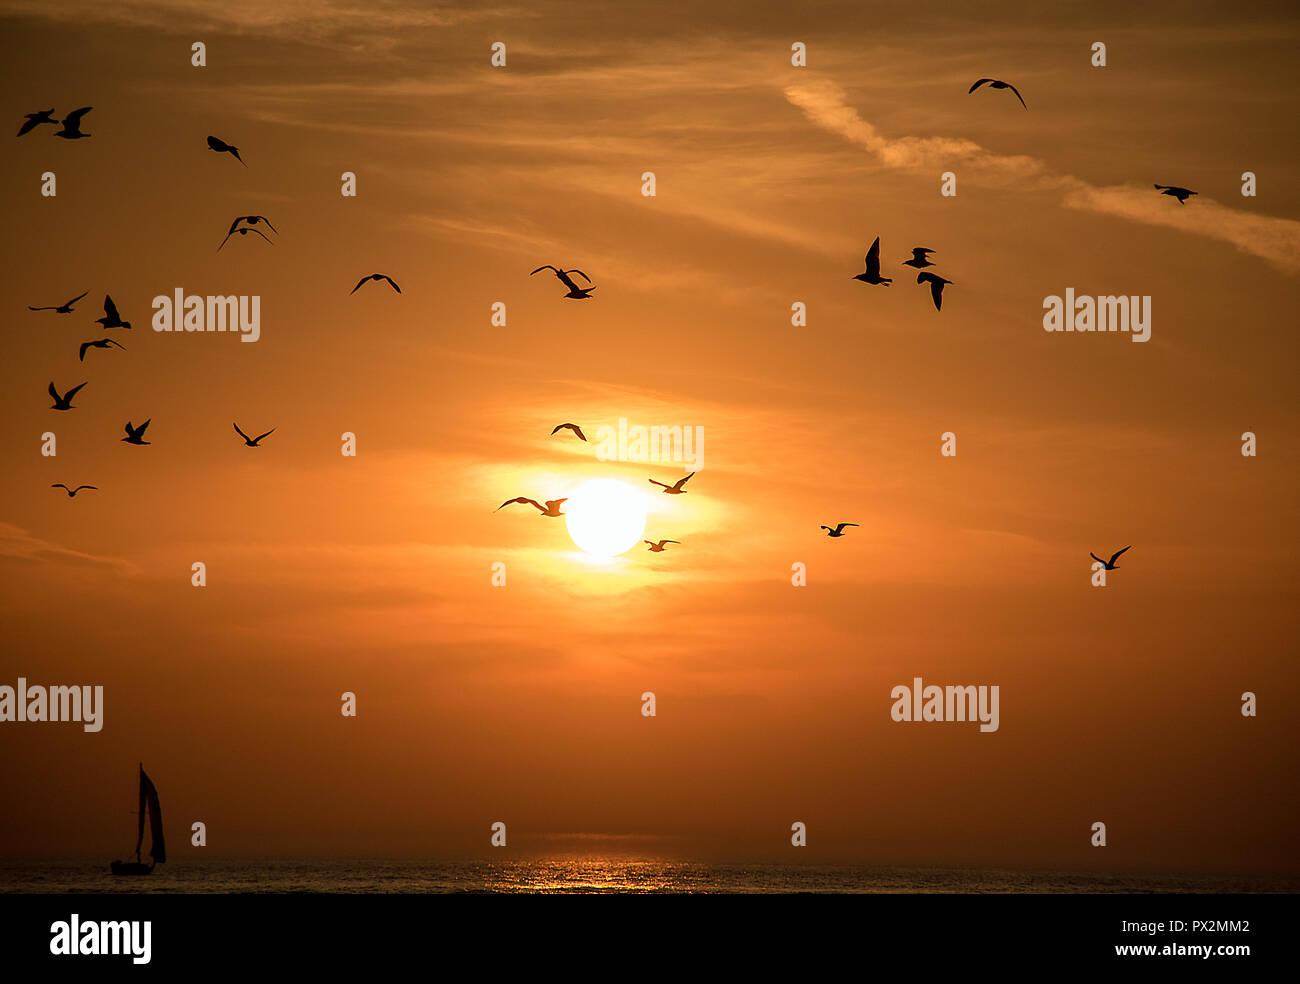 silhouette of seagulls in sunset sky over Lake Michigan water with sailboat Stock Photo